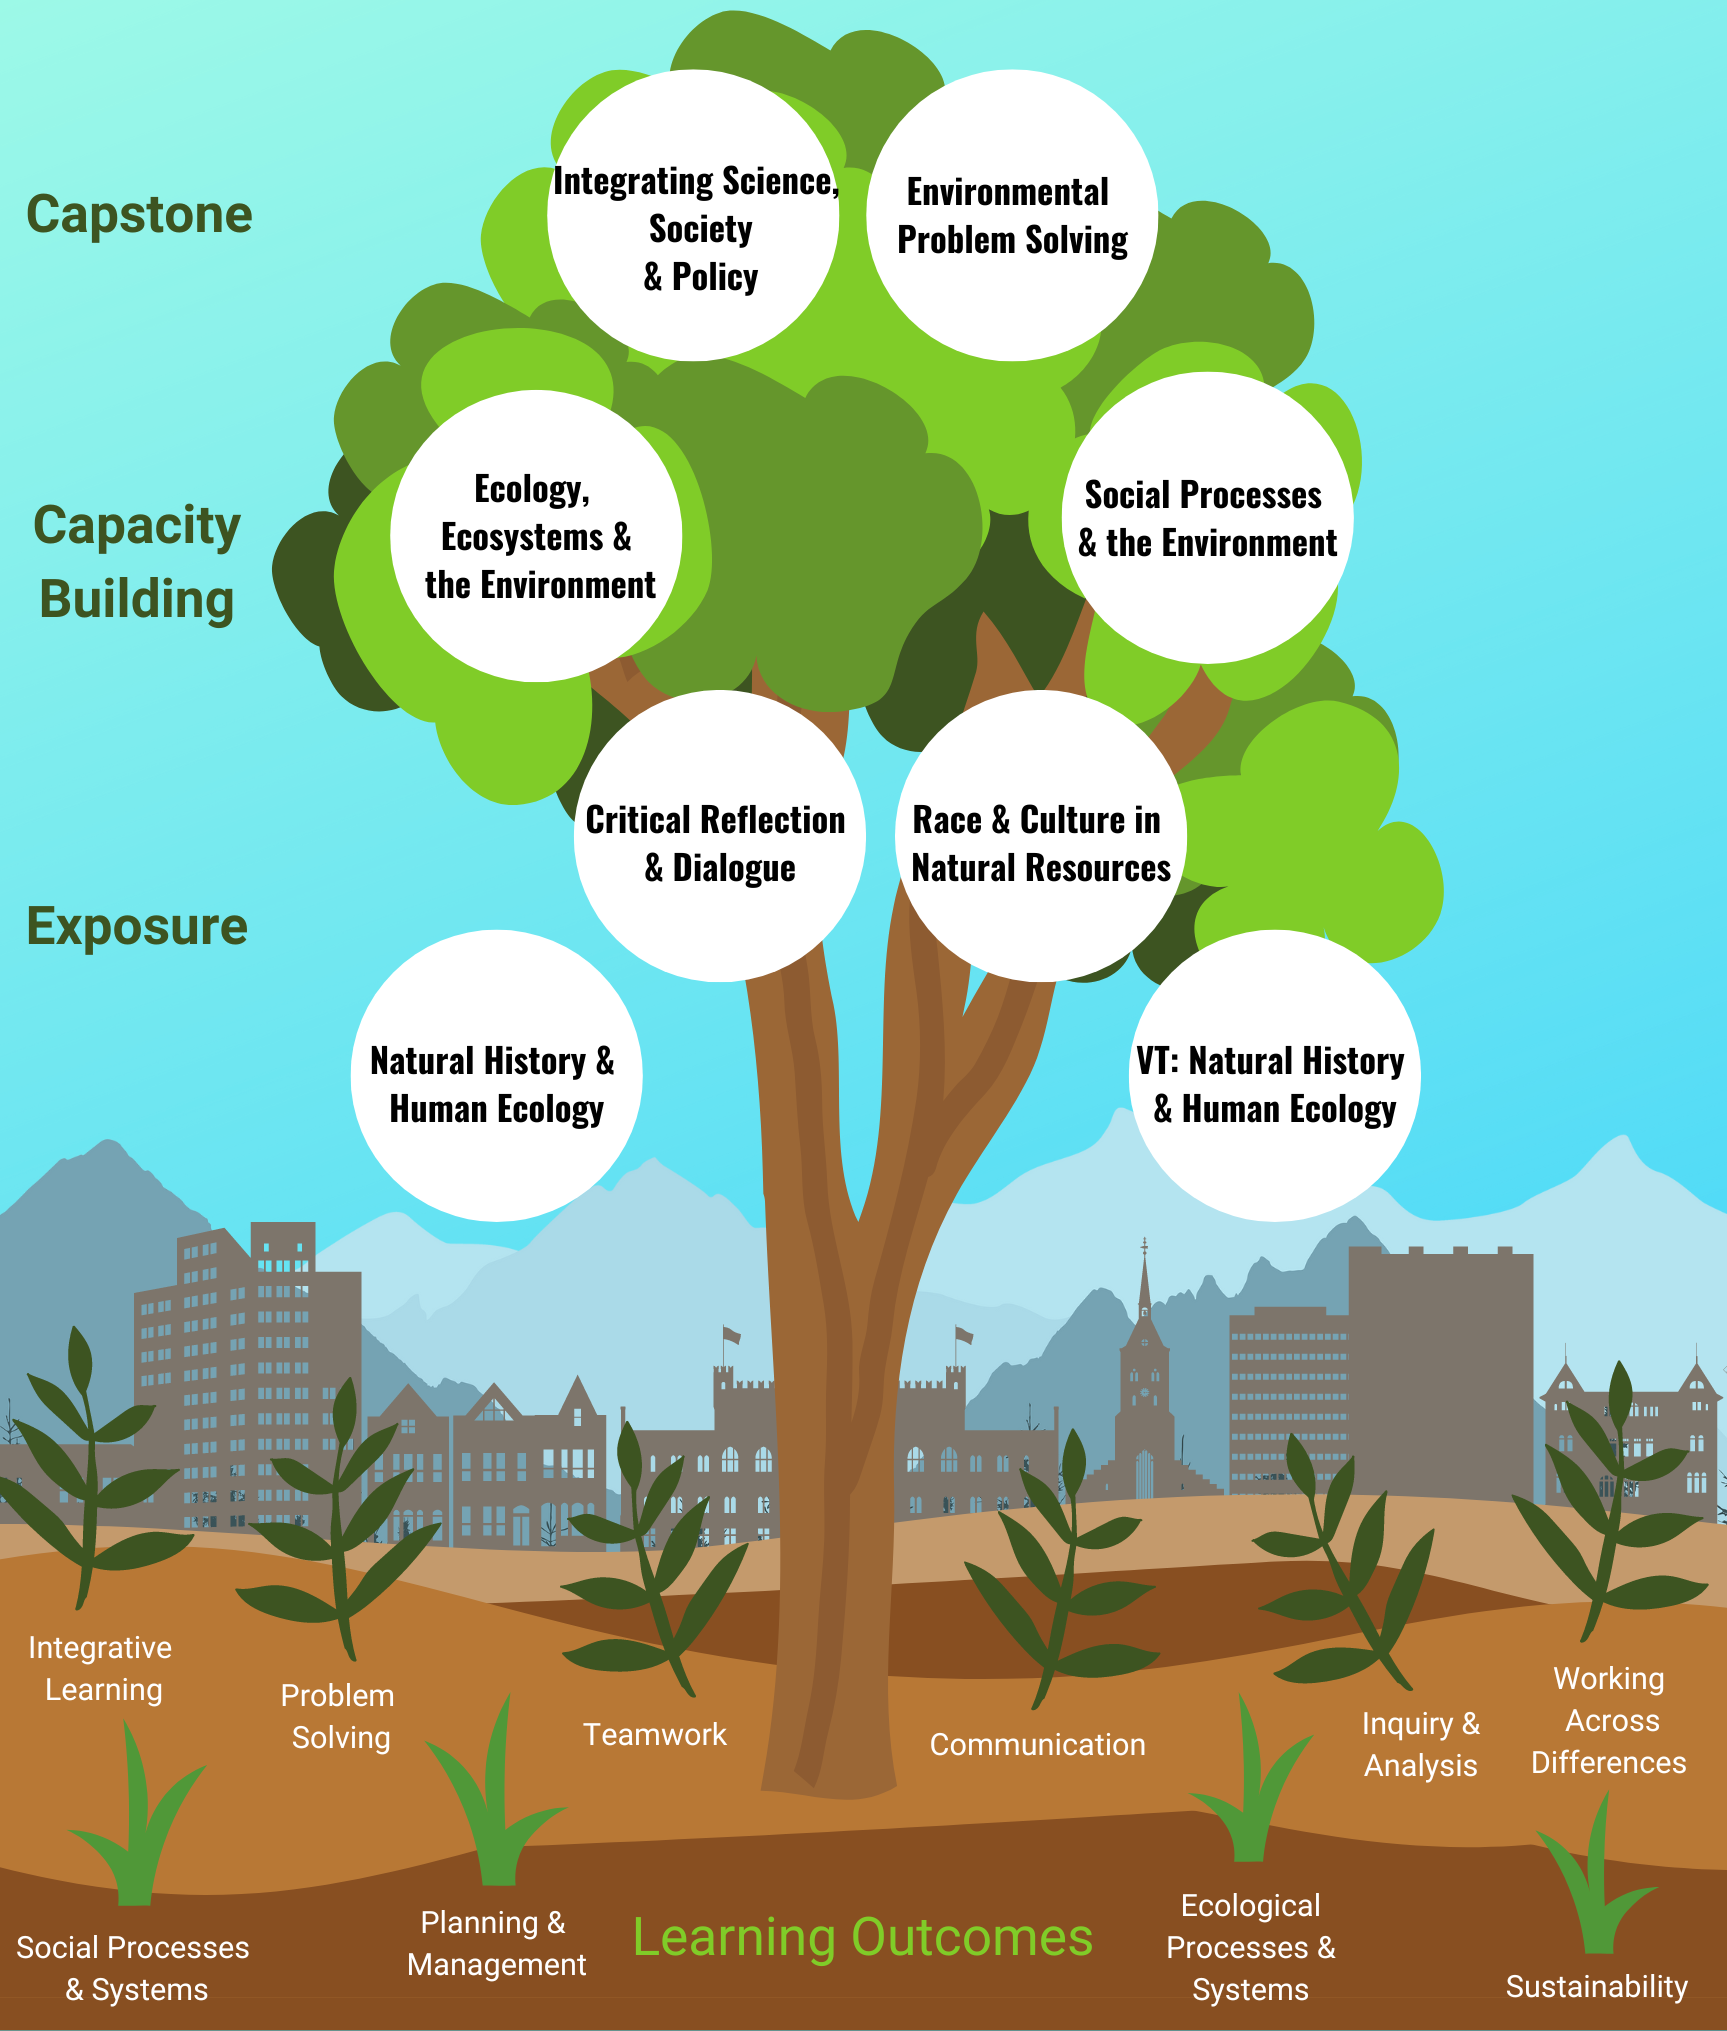 Illustration of a tree with roots representing Learning Outcomes, and the crown of the tree listing core curriculum class titles.